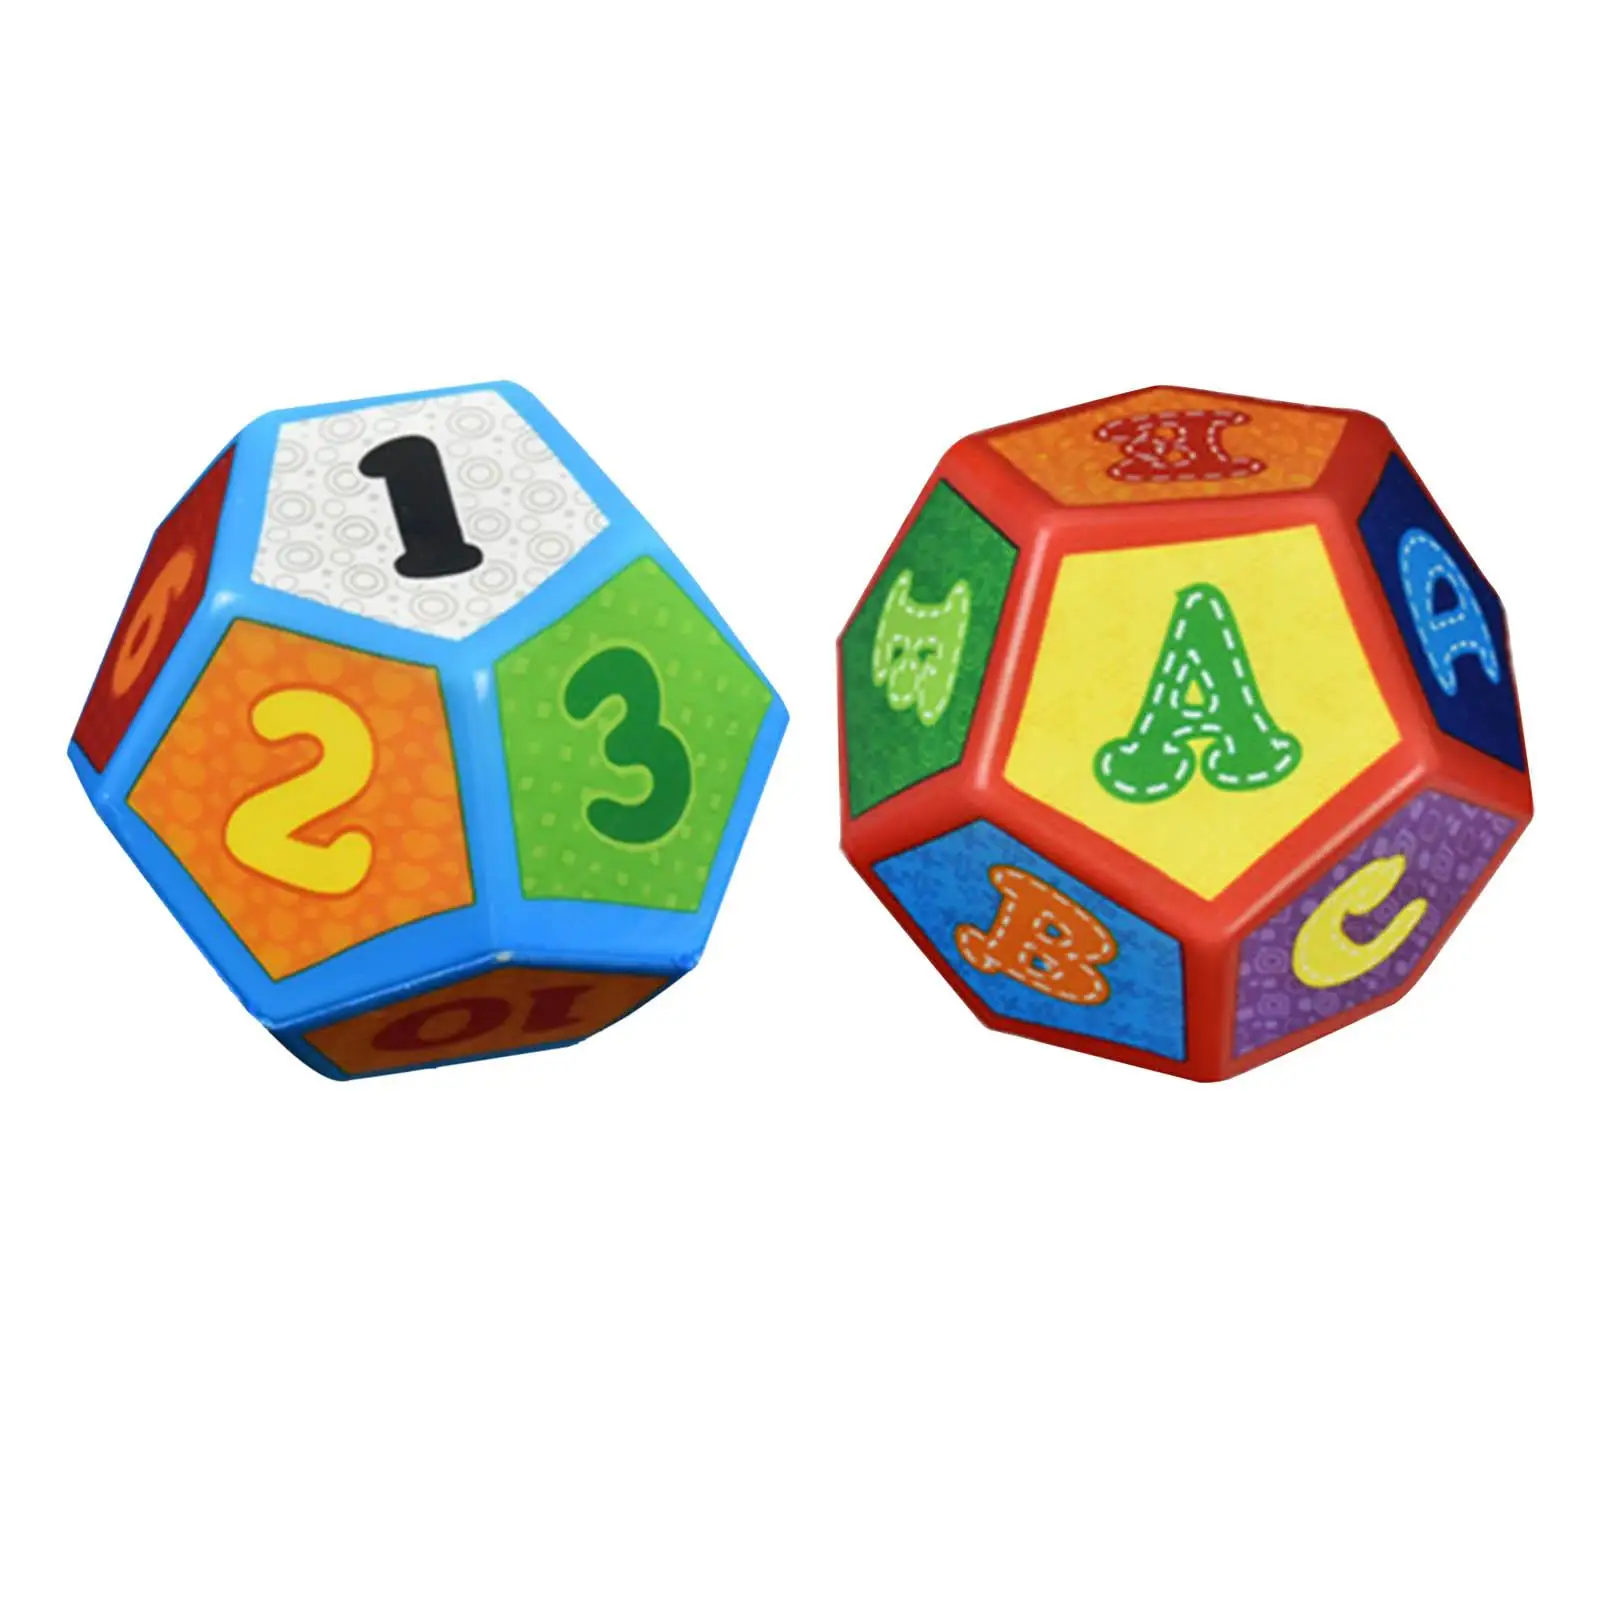  Sided Dice Lightweight Play Entertainment Toys for Game Accessories